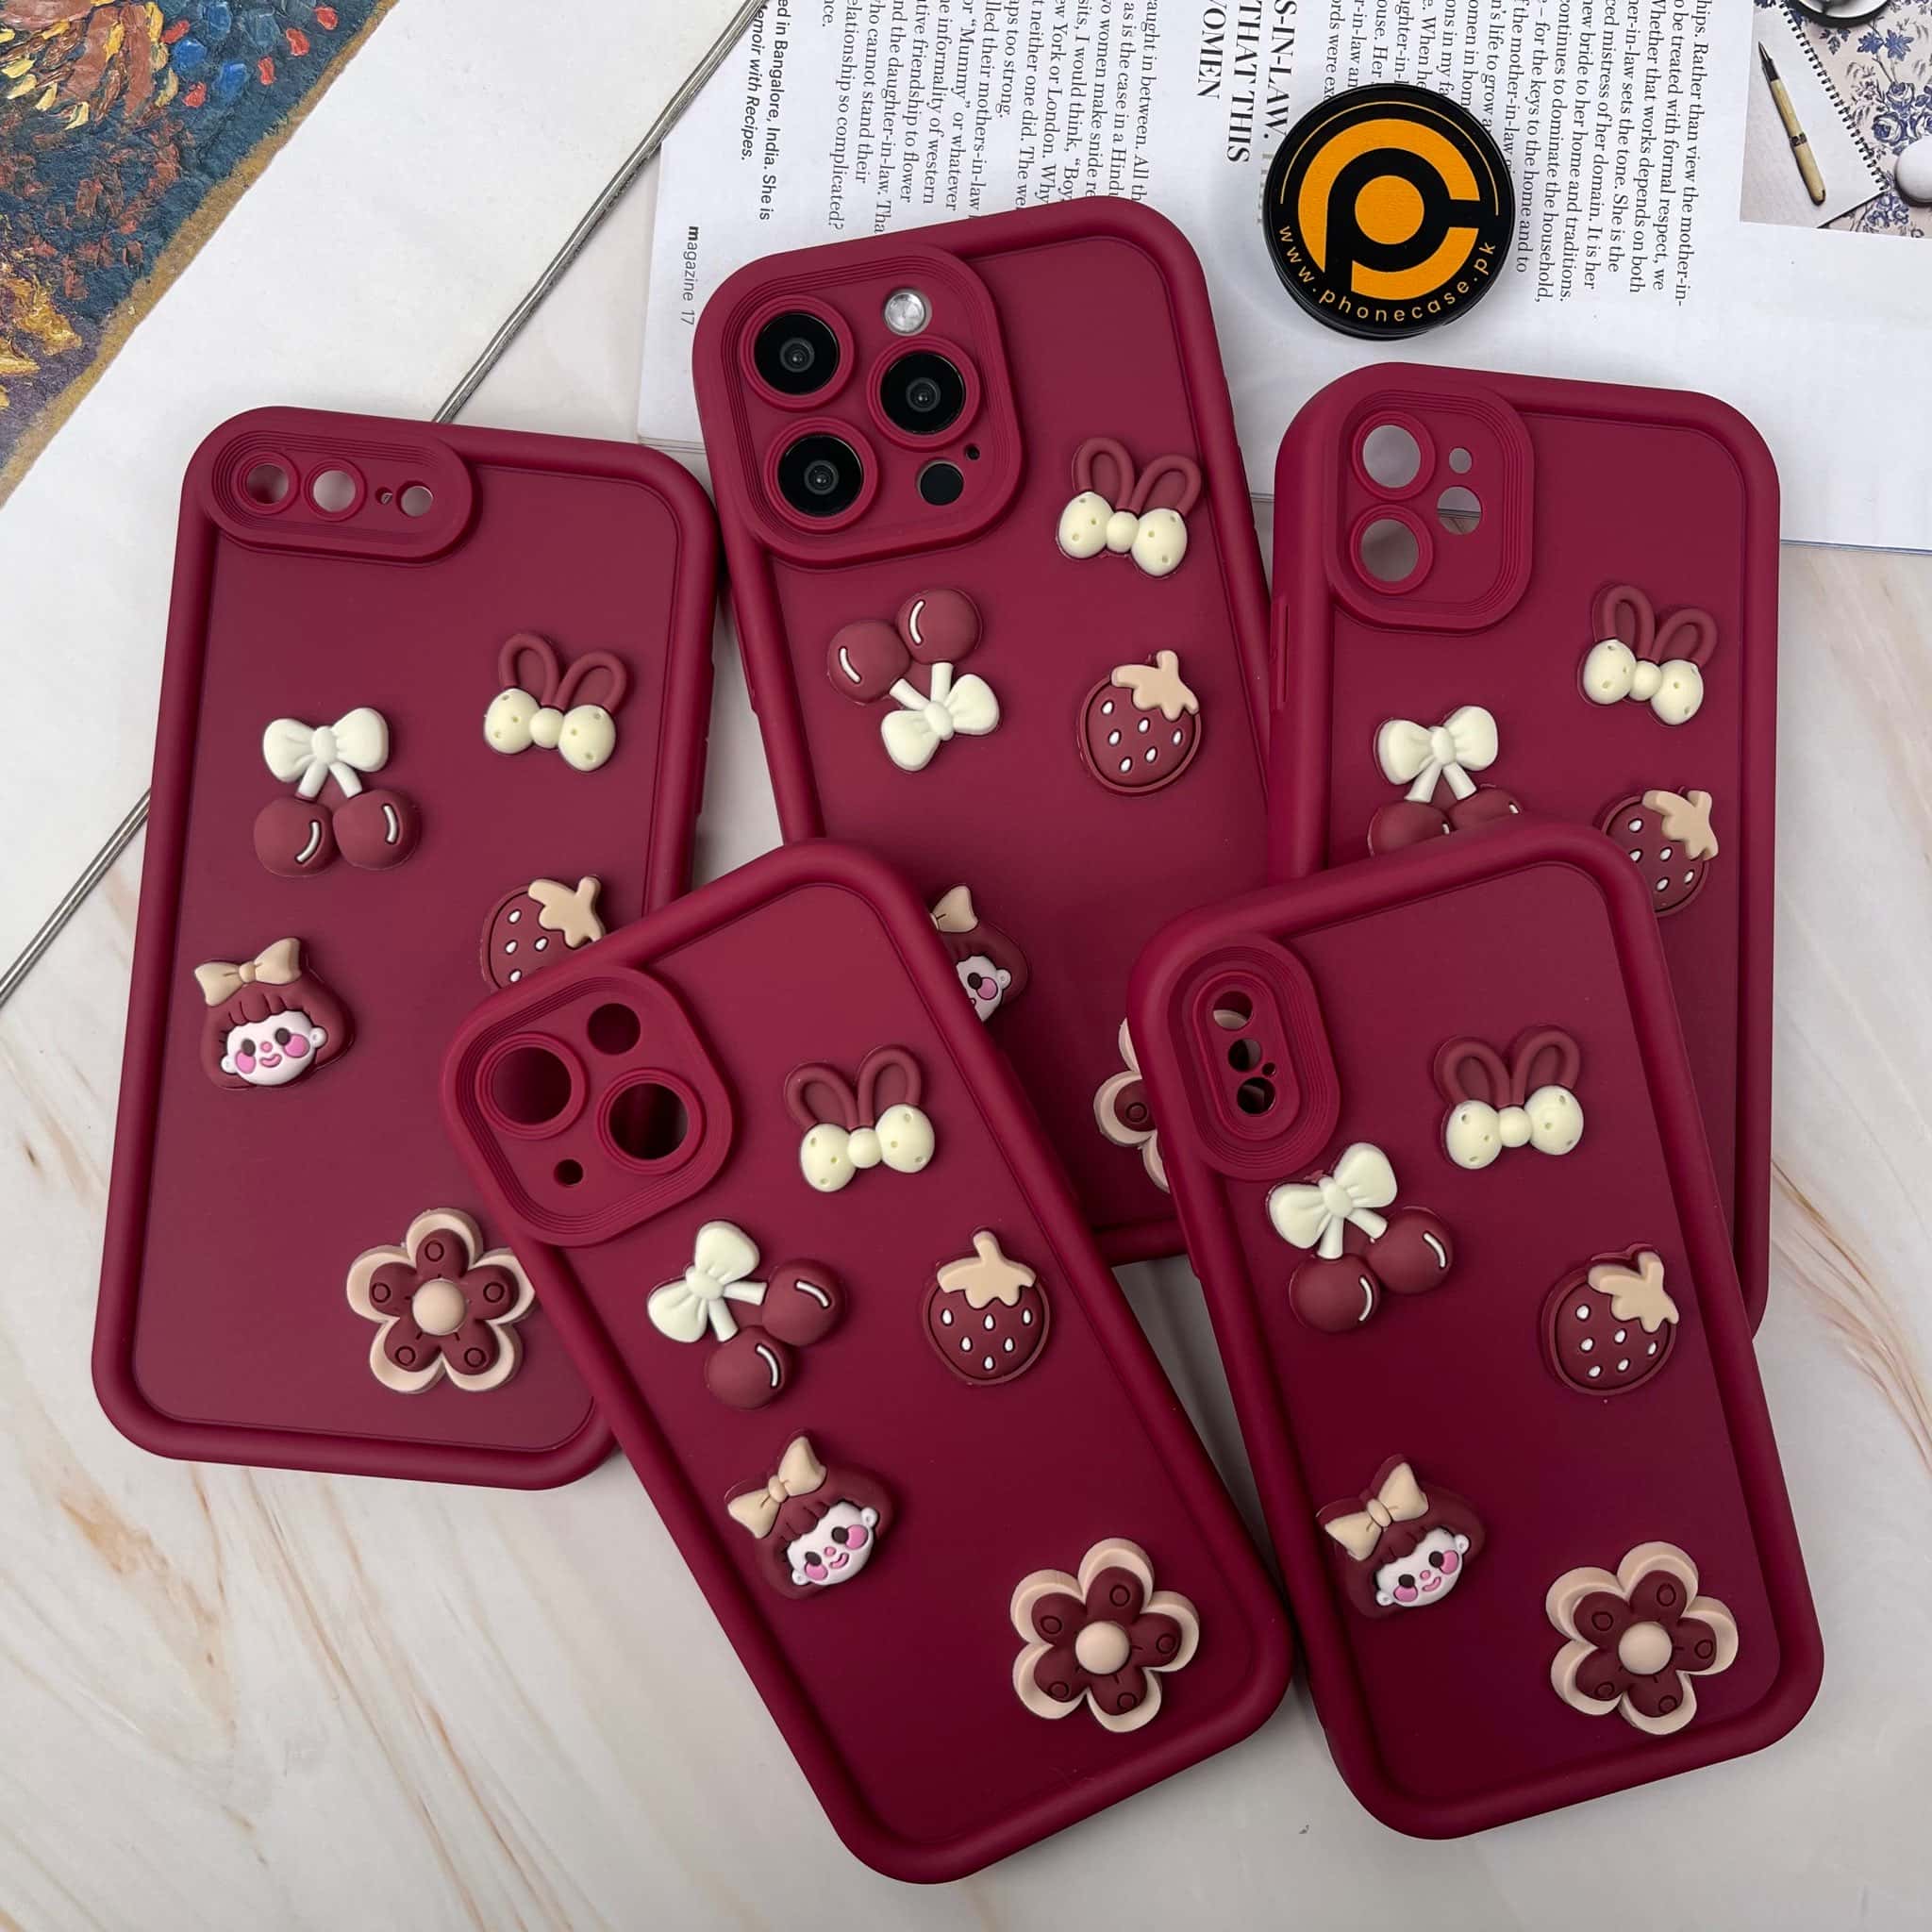 iPhone 11 Cute 3D Cherry Flower Icons Silicon Case